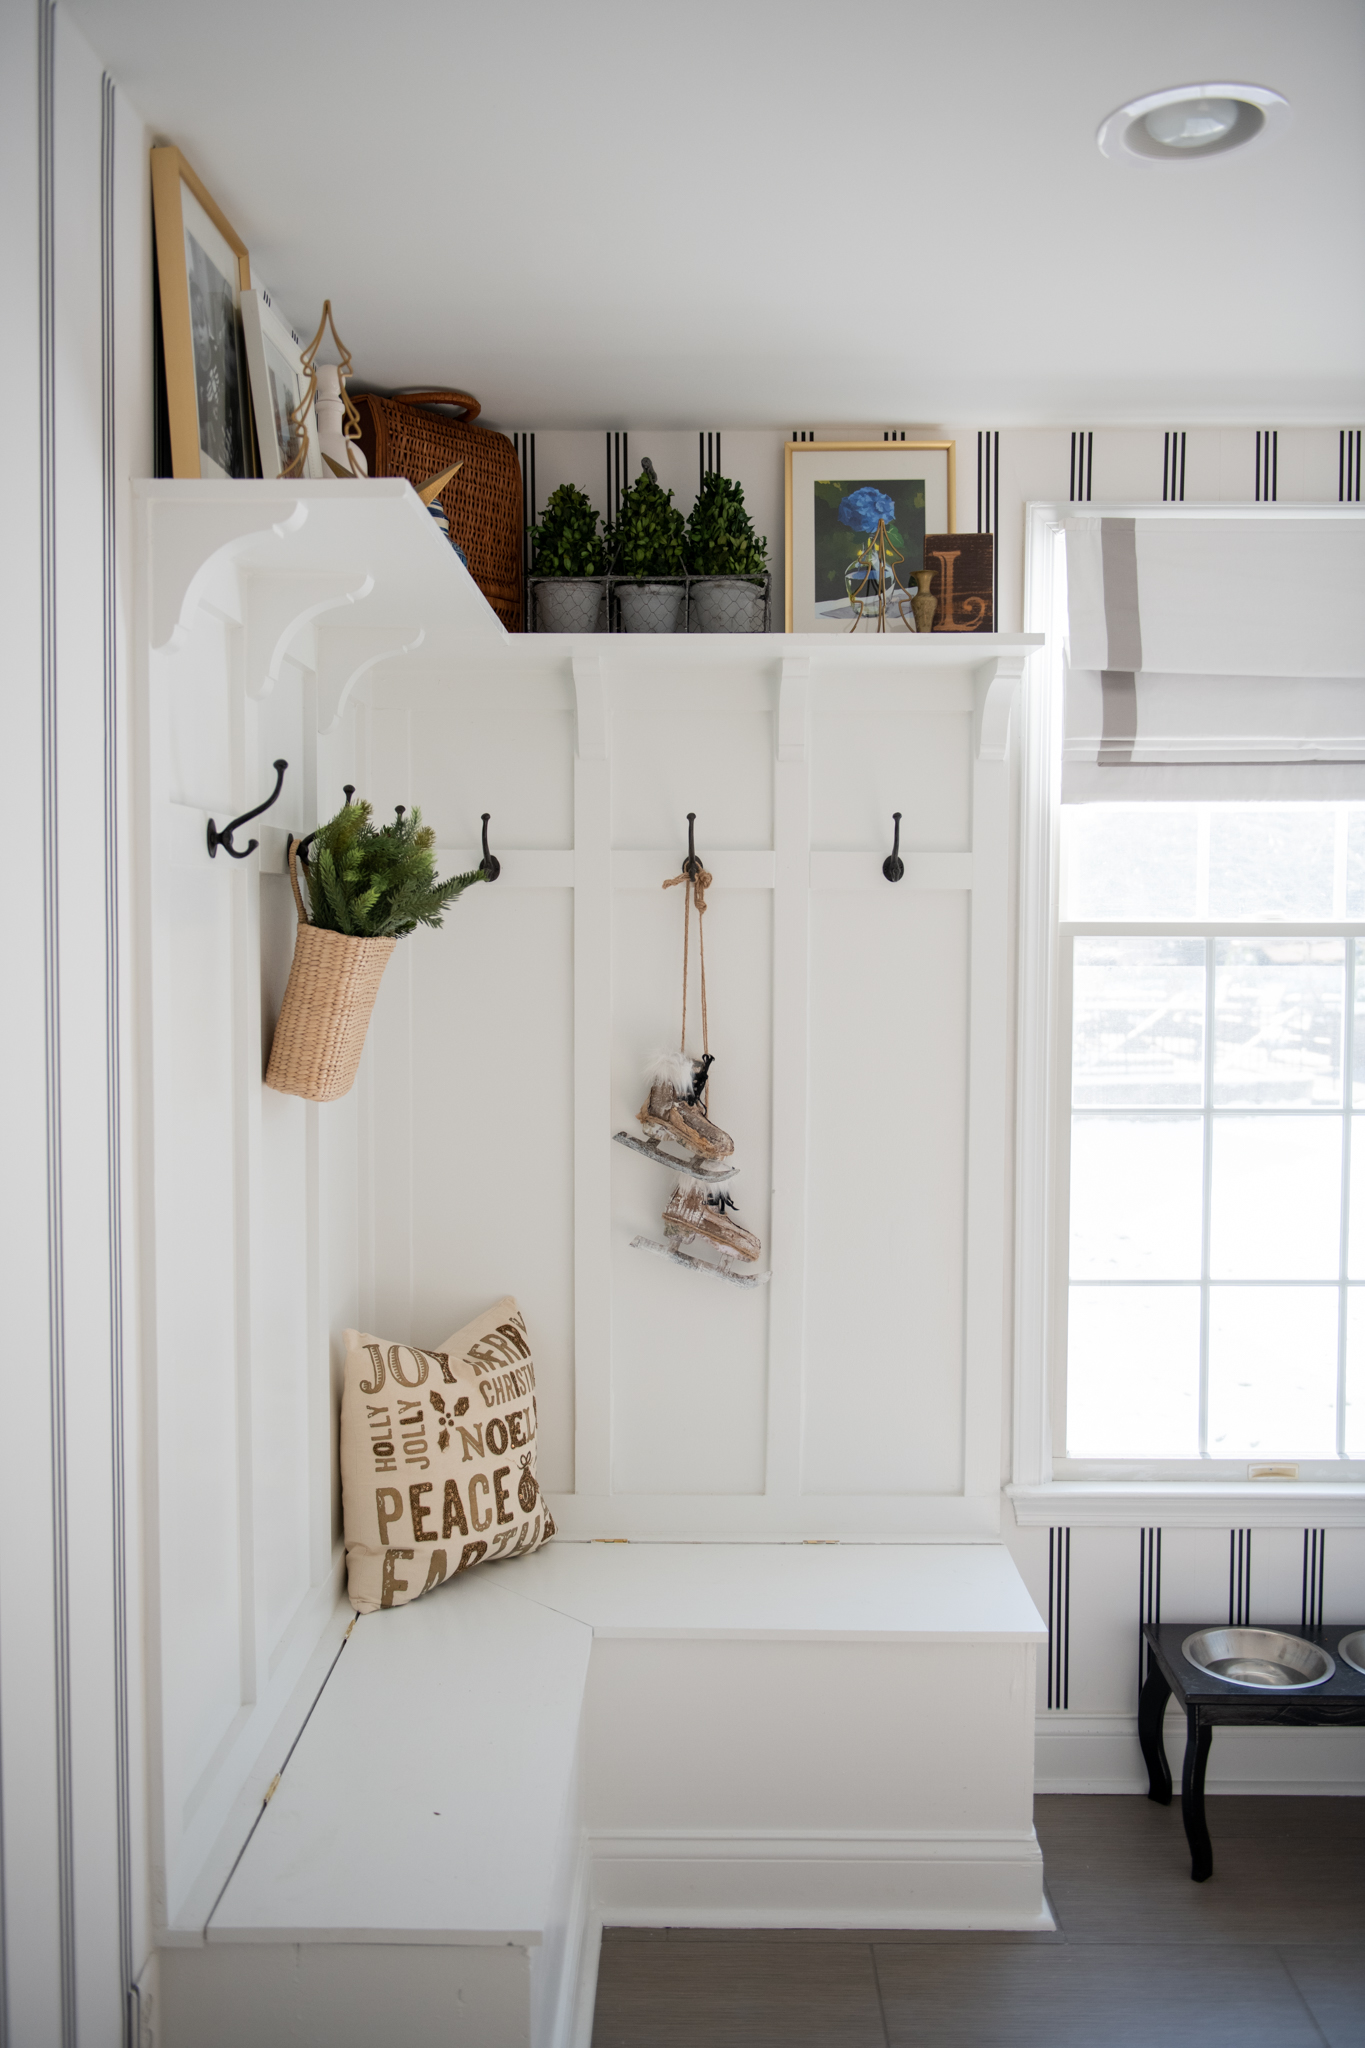 Christmas Home Decor Ideas by popular Ohio life and style blog, Coffee Beans and Bobby Pins: image of a mudroom decorated with ice skates decor, Christmas throw pillow basket filled with pine tree branches, and mini Christmas tree decor. 